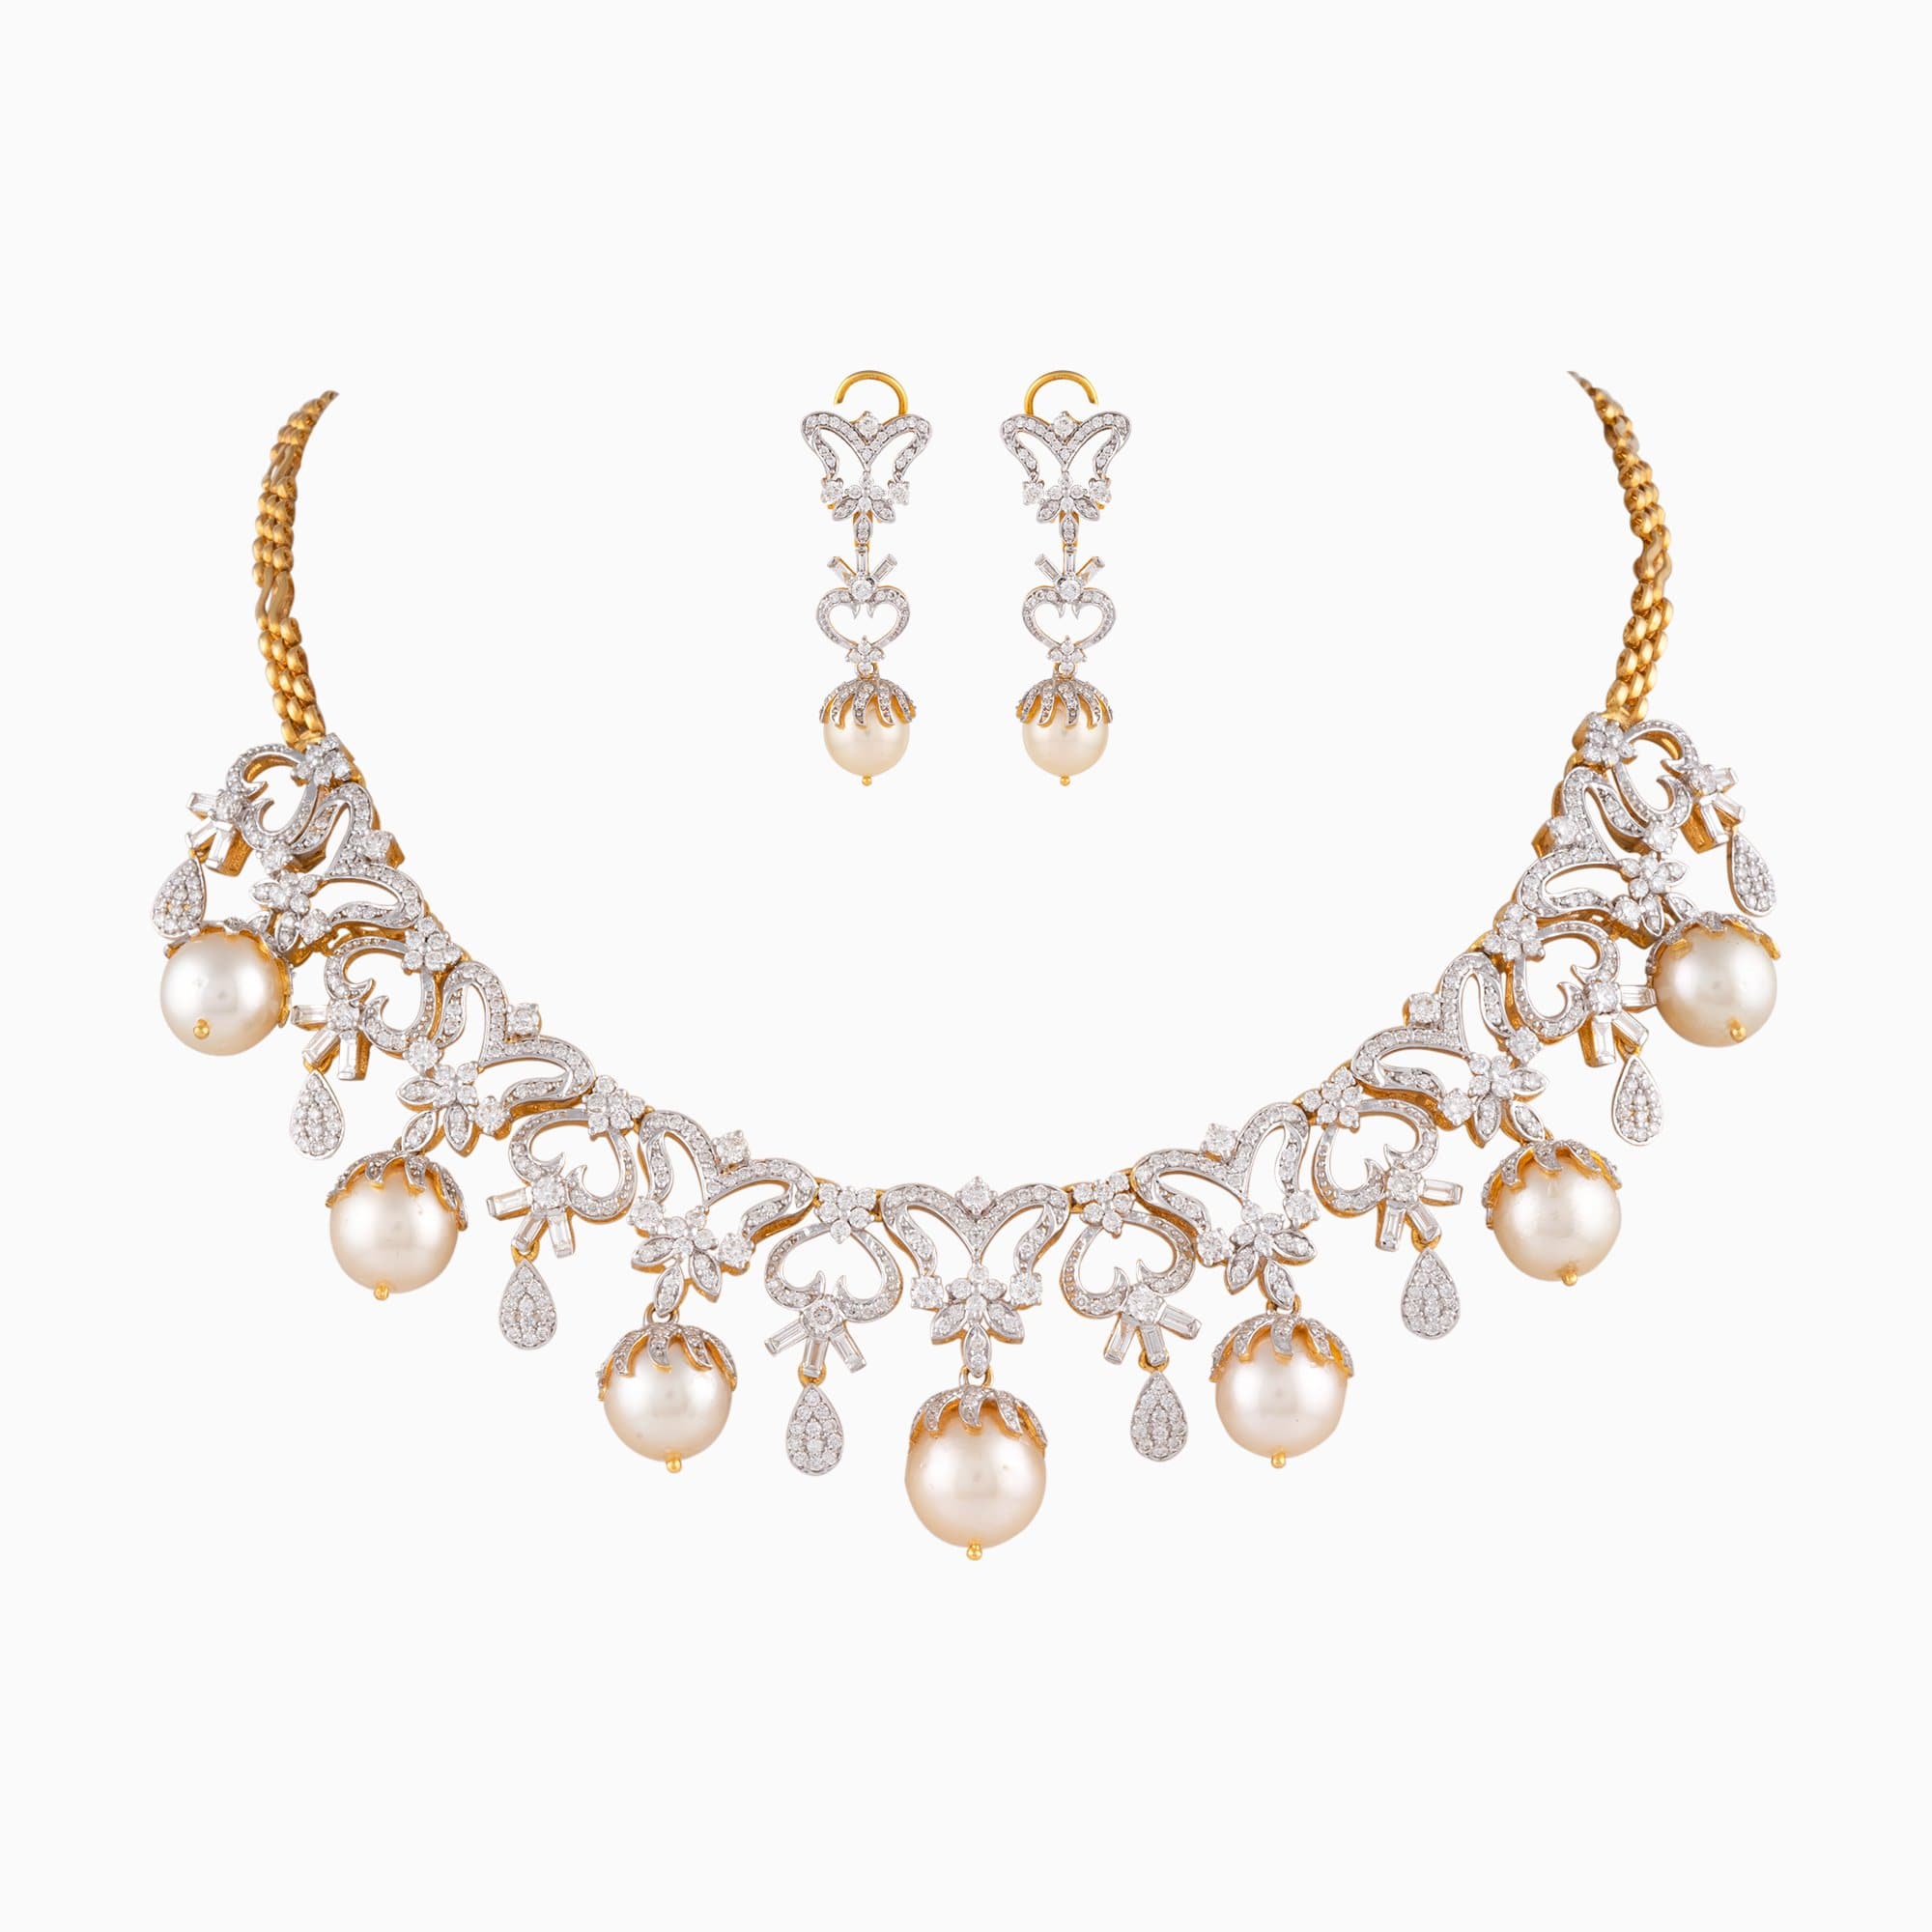 Necklace with Round Cut Diamond, Begg Cut Diamond, S.S. Pearls with Cap in Gold Chain + dia. begg. + s s moti + cap + gold chain-WDN942